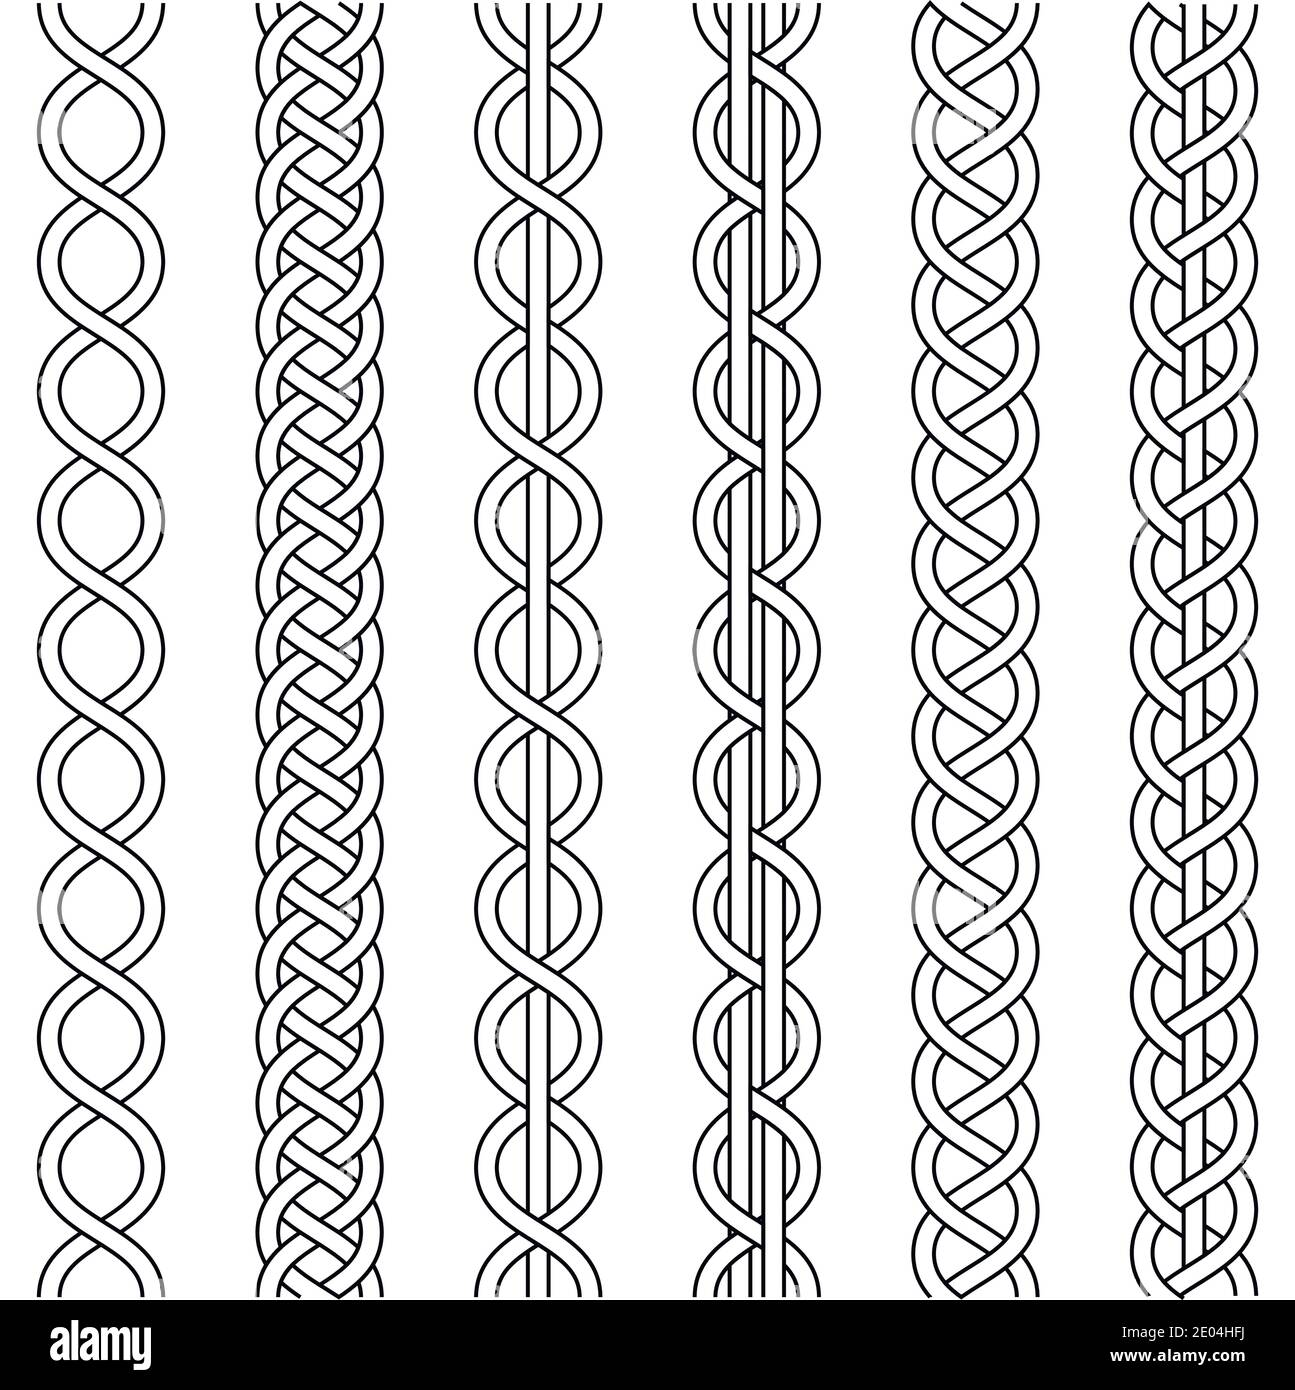 Ropes Pattern Brushes. Braids And Plaits Silhouette Collection